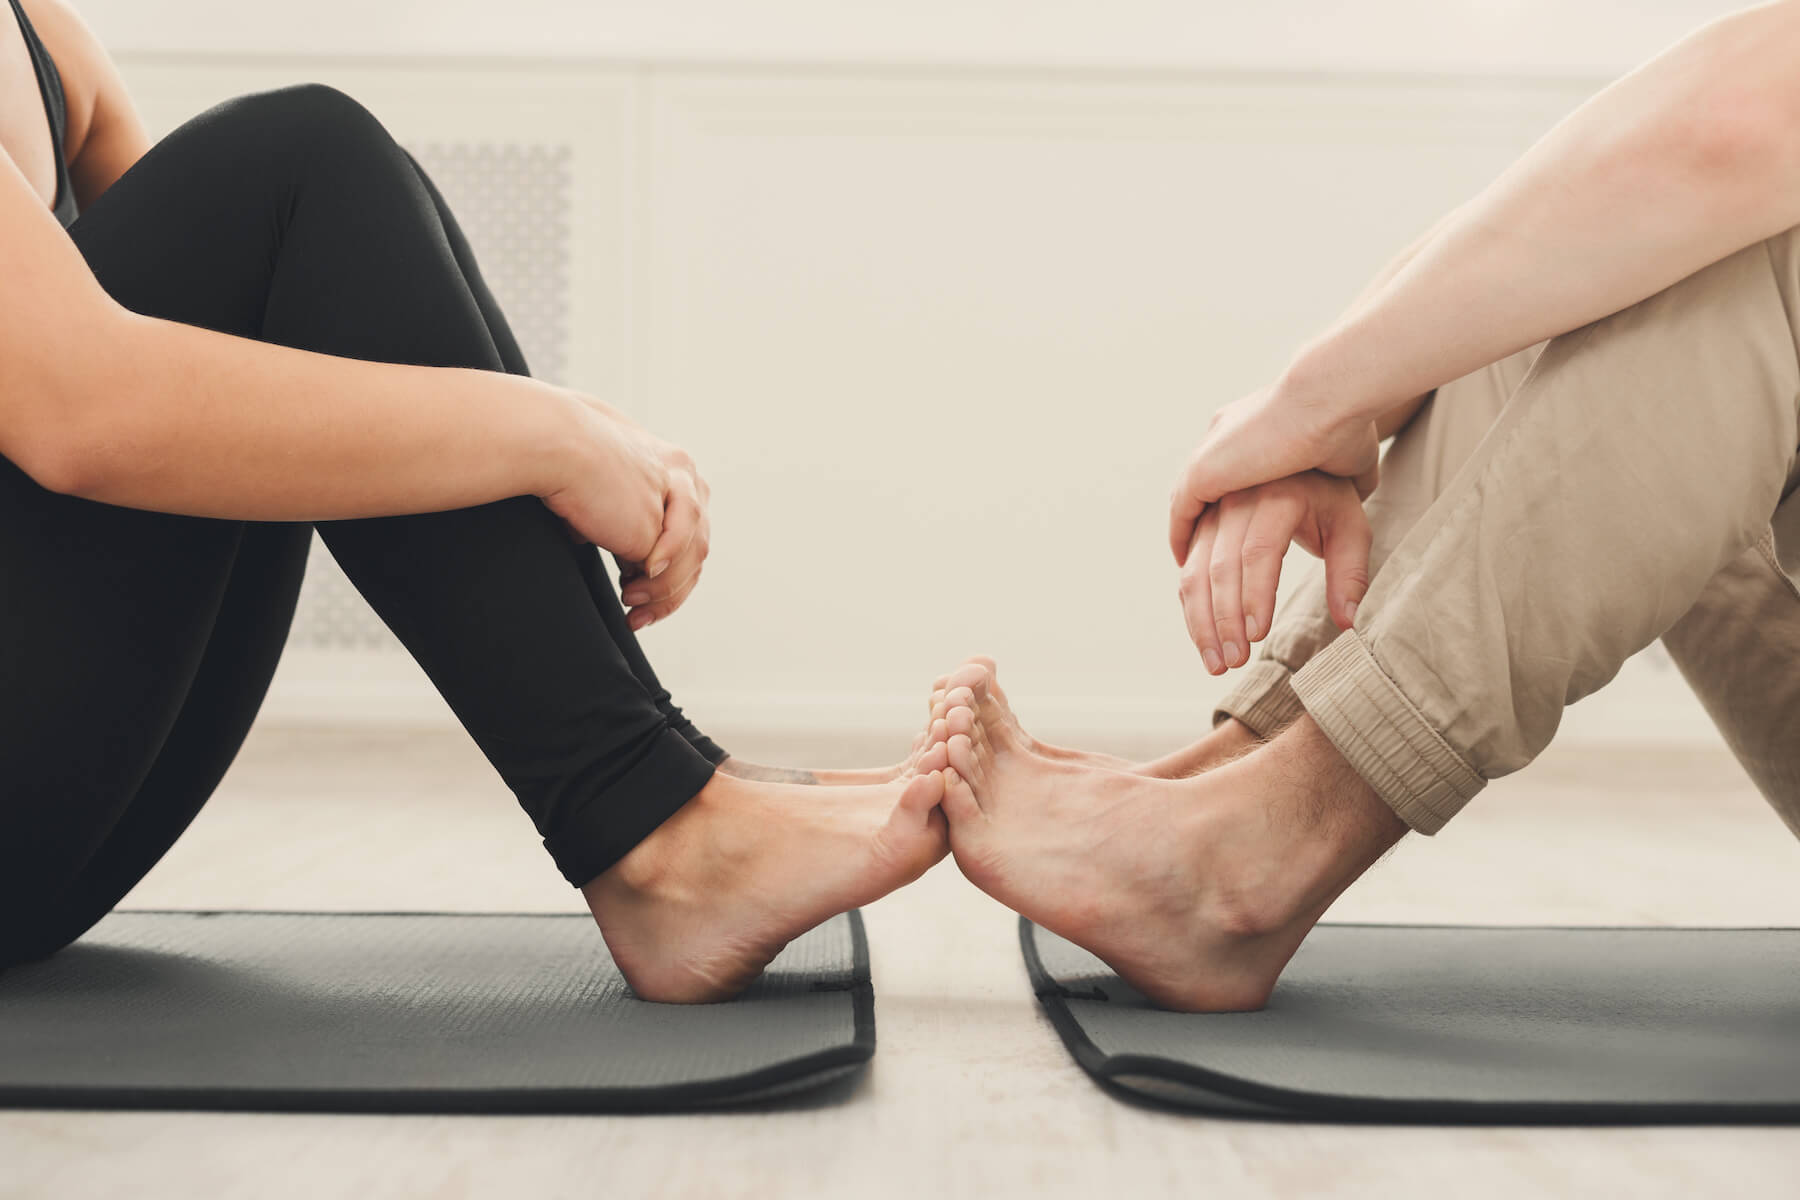 Foot and Toe Yoga: 5 Tips For Stronger Feet - Foot and Ankle Group